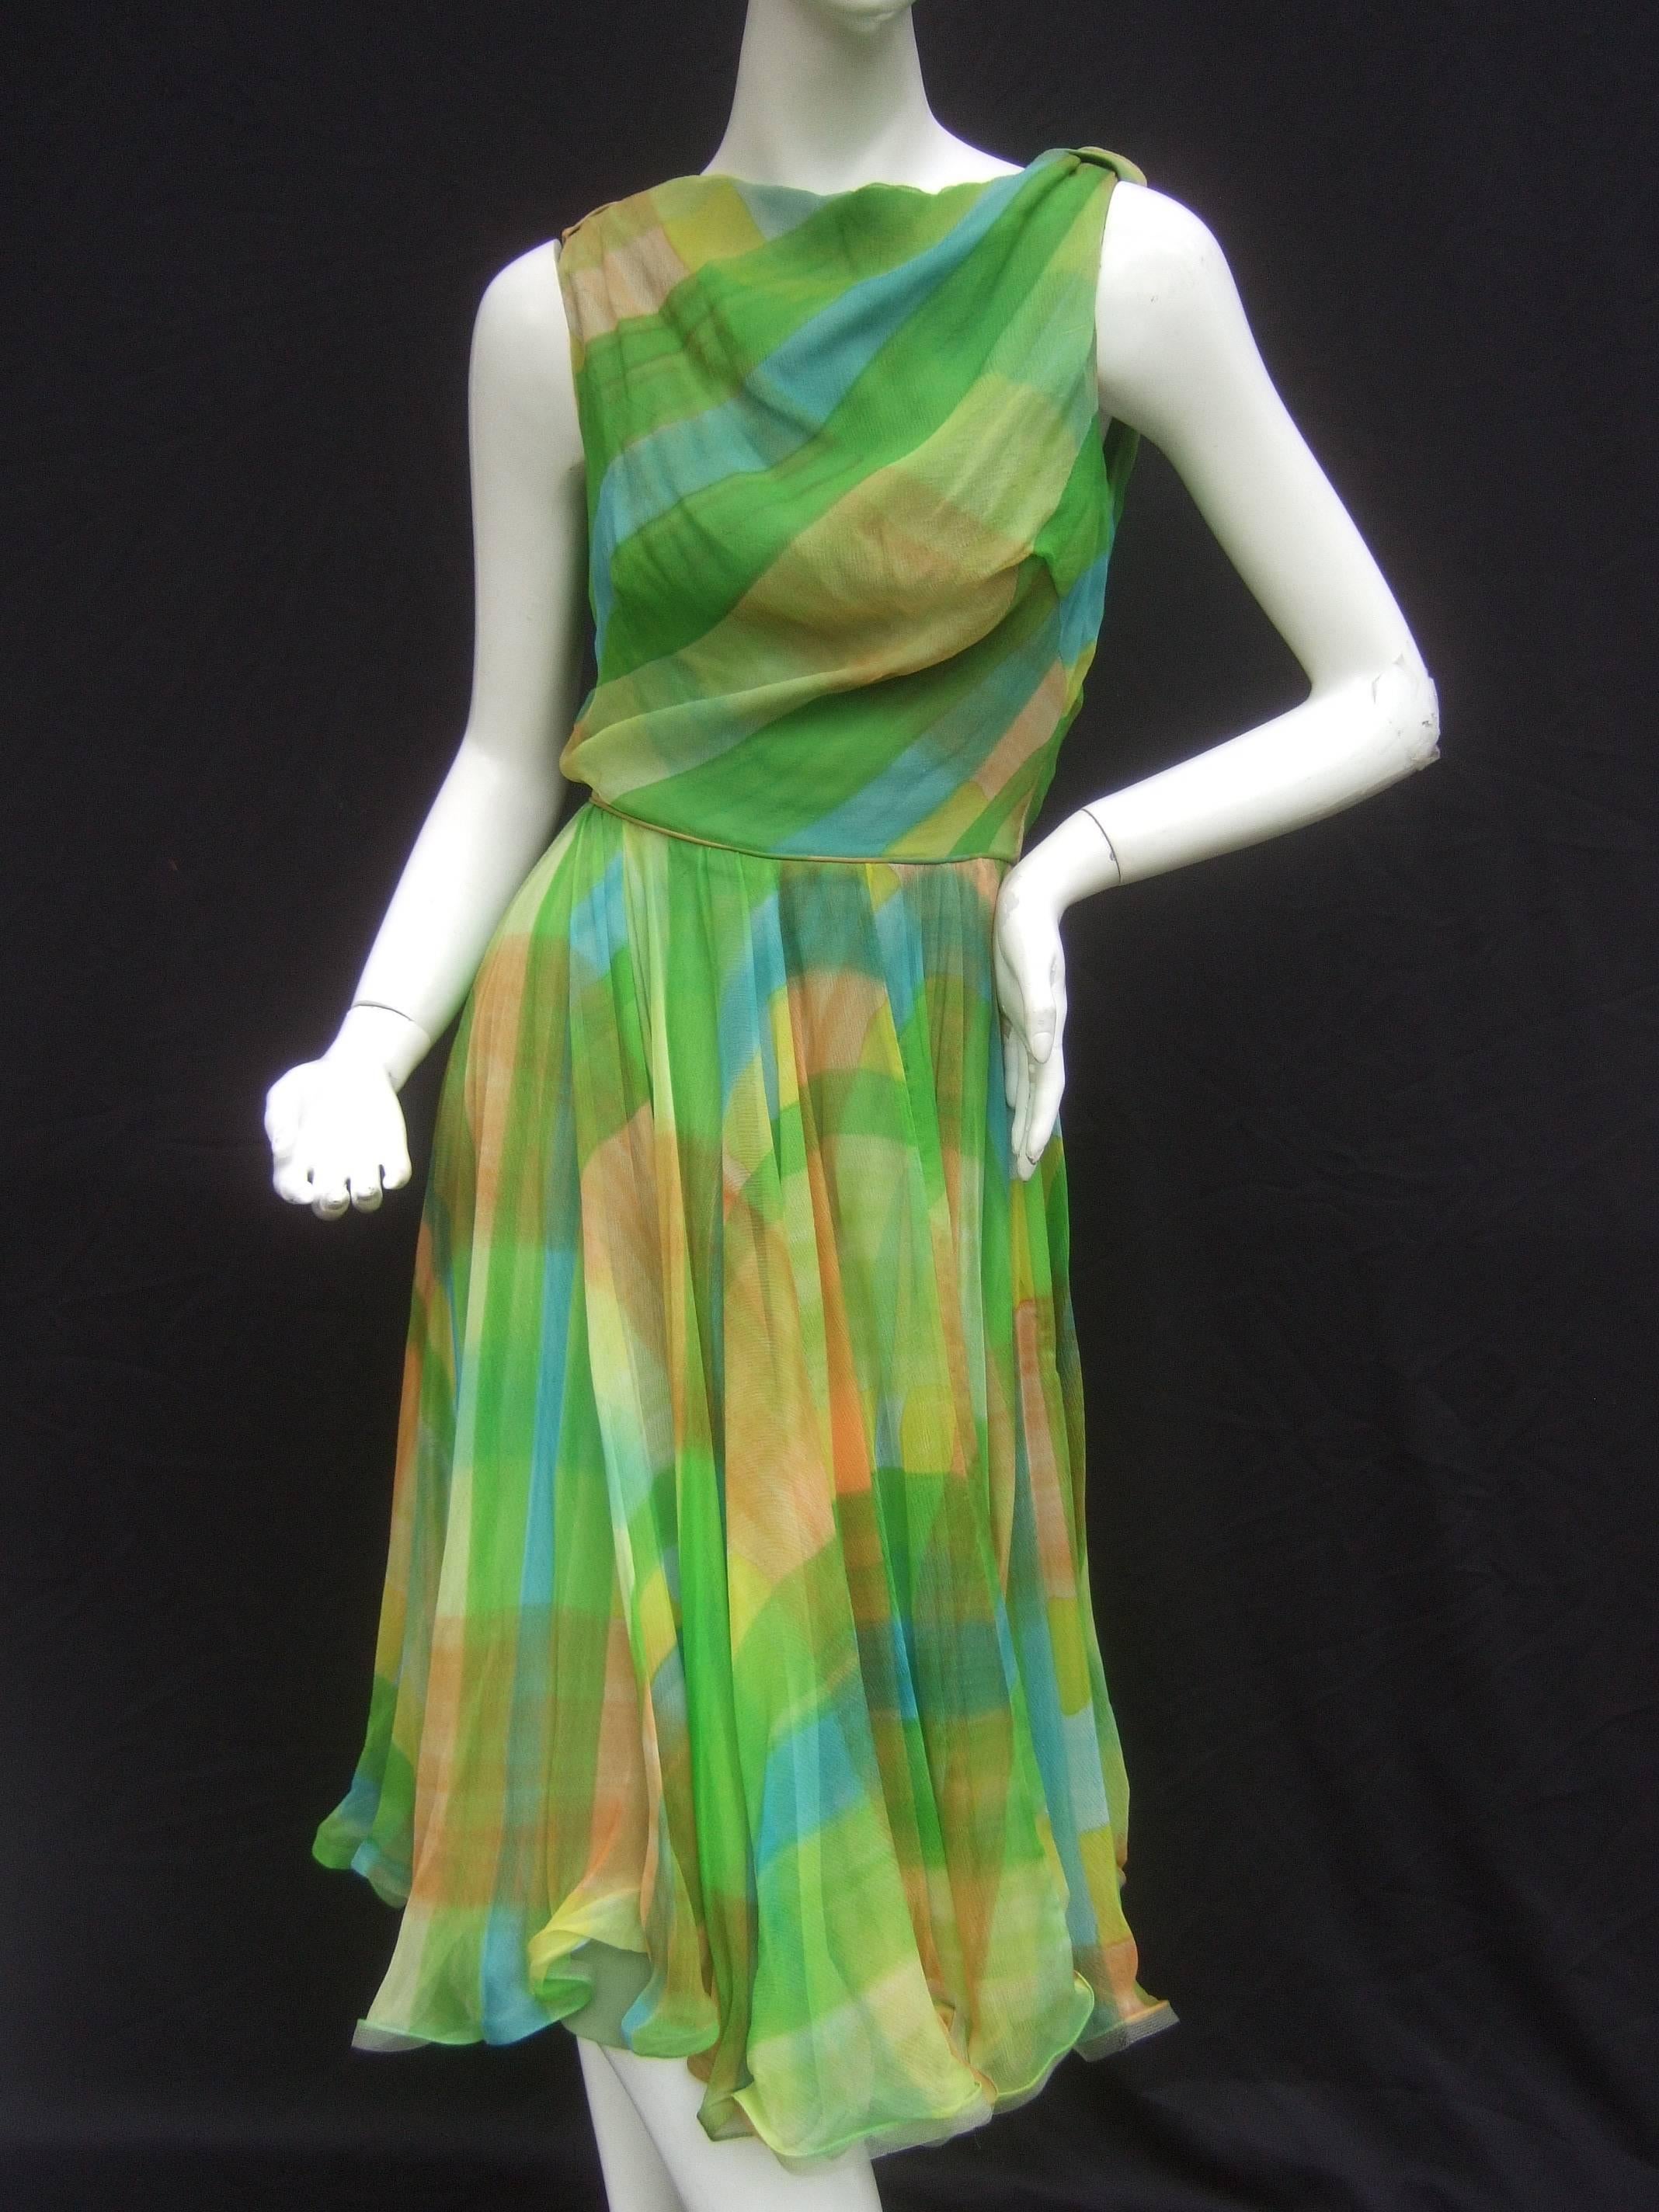 1960s Vibrant sheer silk chiffon swing dress ca 1960
The chic retro dress is a palette of citrus greens,
hints of golden yellow, with streaks of aqua blue
and smoky brown bands

The back side of the sleeveless bodice is designed
with sweeping